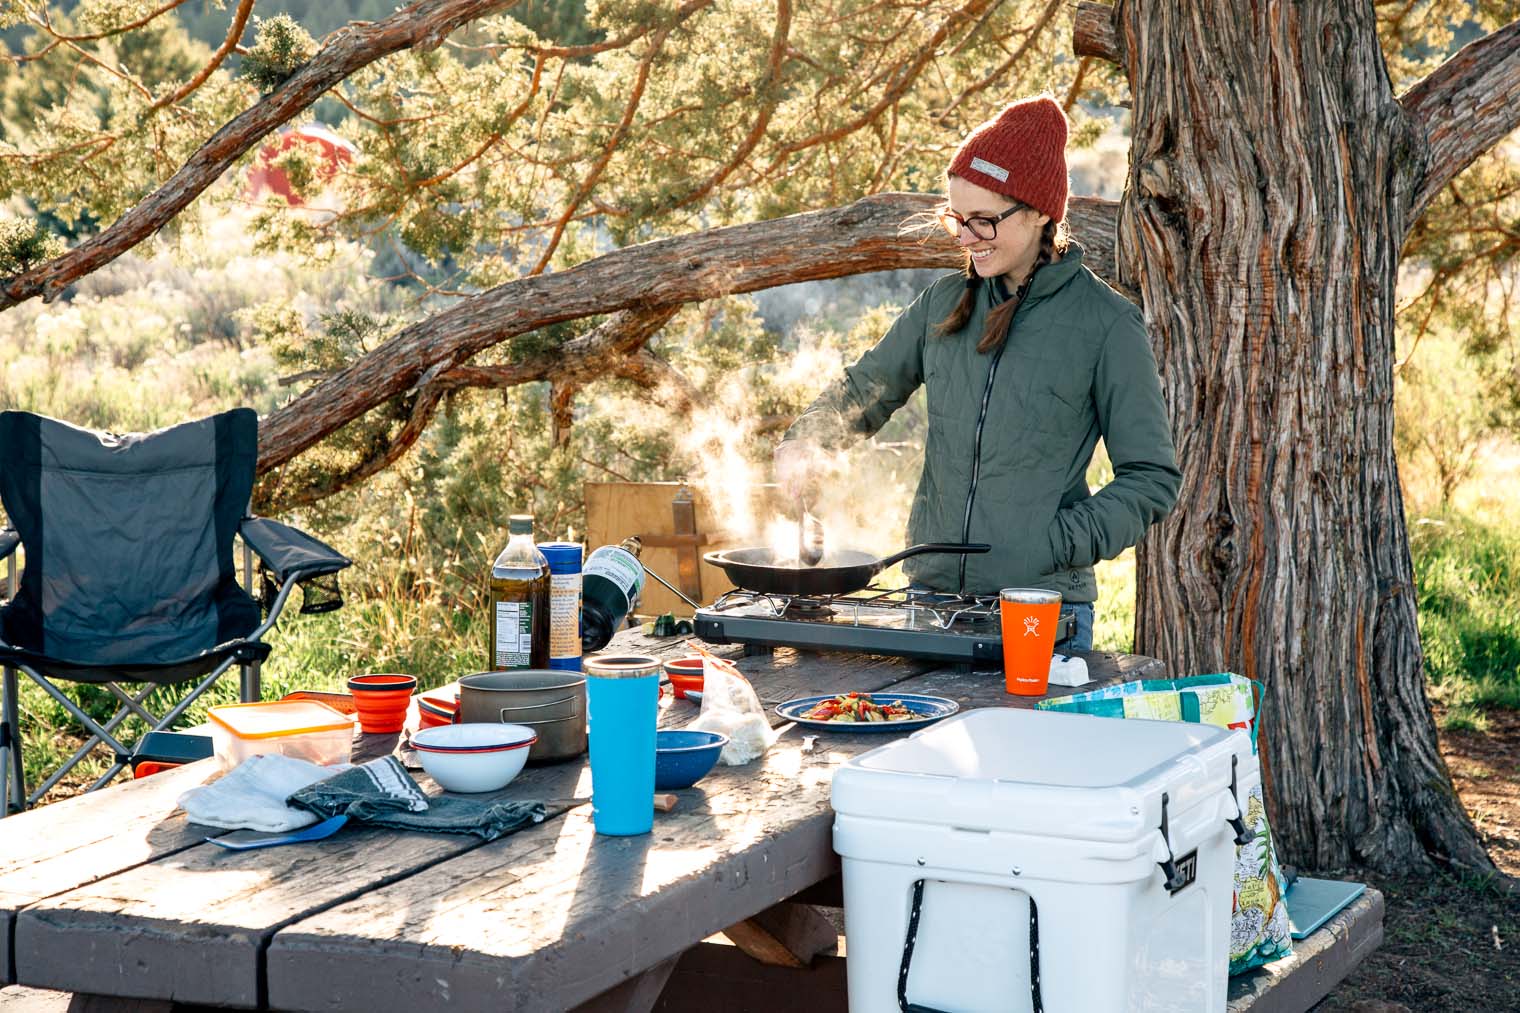 4 Functional Portable Coolers to Bring On A Camping Trip